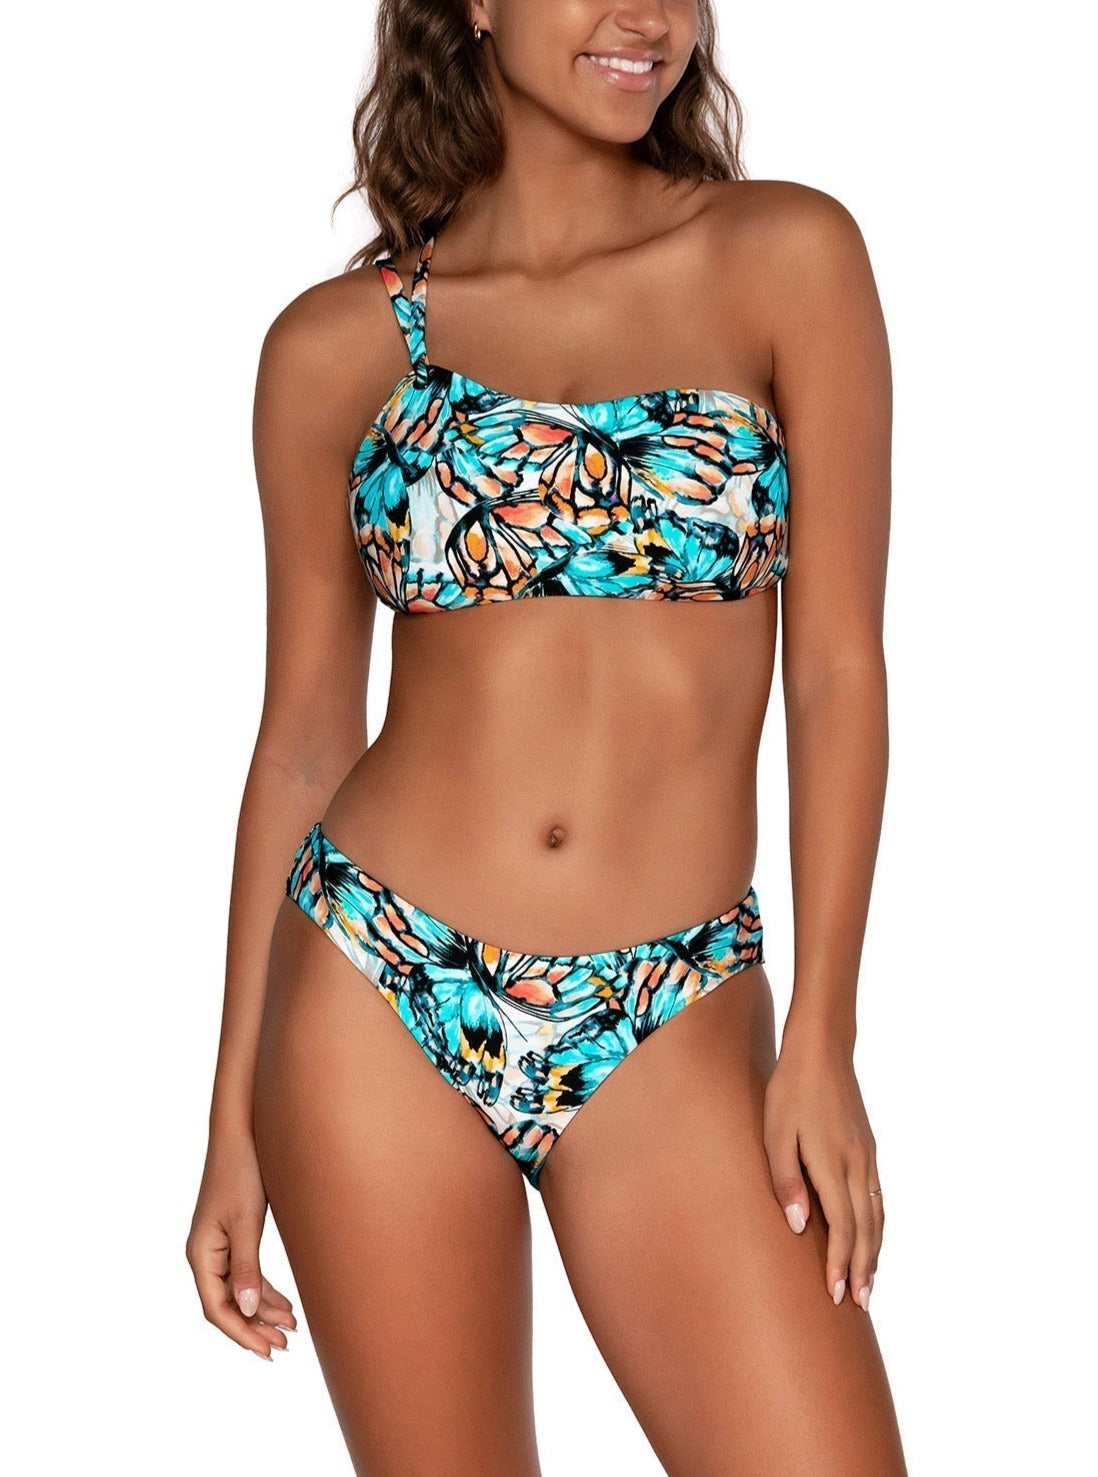 Swim Systems &quot;Brands,Swimwear&quot; XS / PACGR / T521 Swim Systems Pacific Grove Reese One Shoulder Top